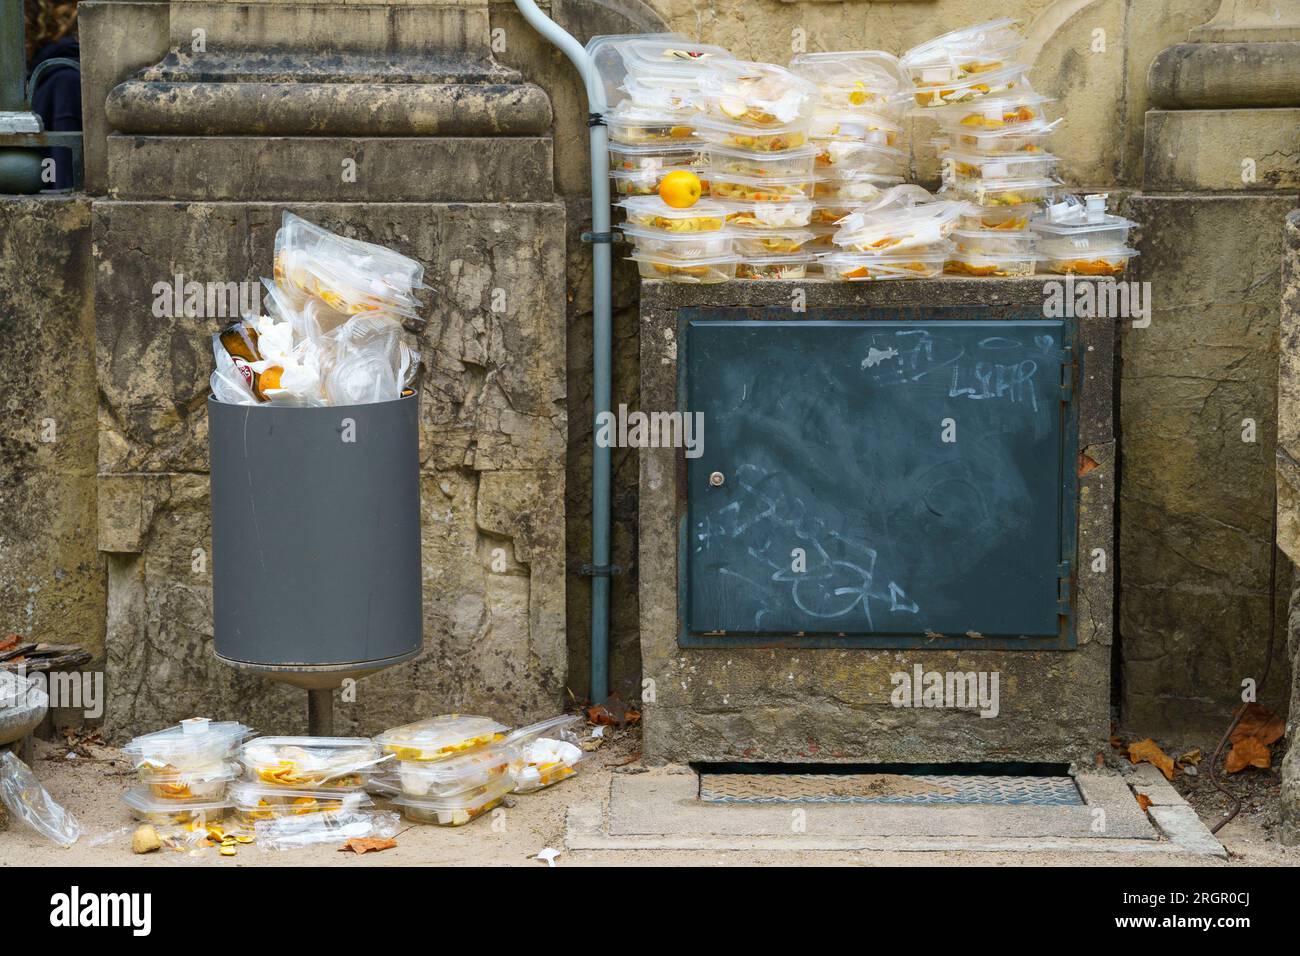 Discarded disposable plastic food containers piled up next to an overflown trash can Stock Photo